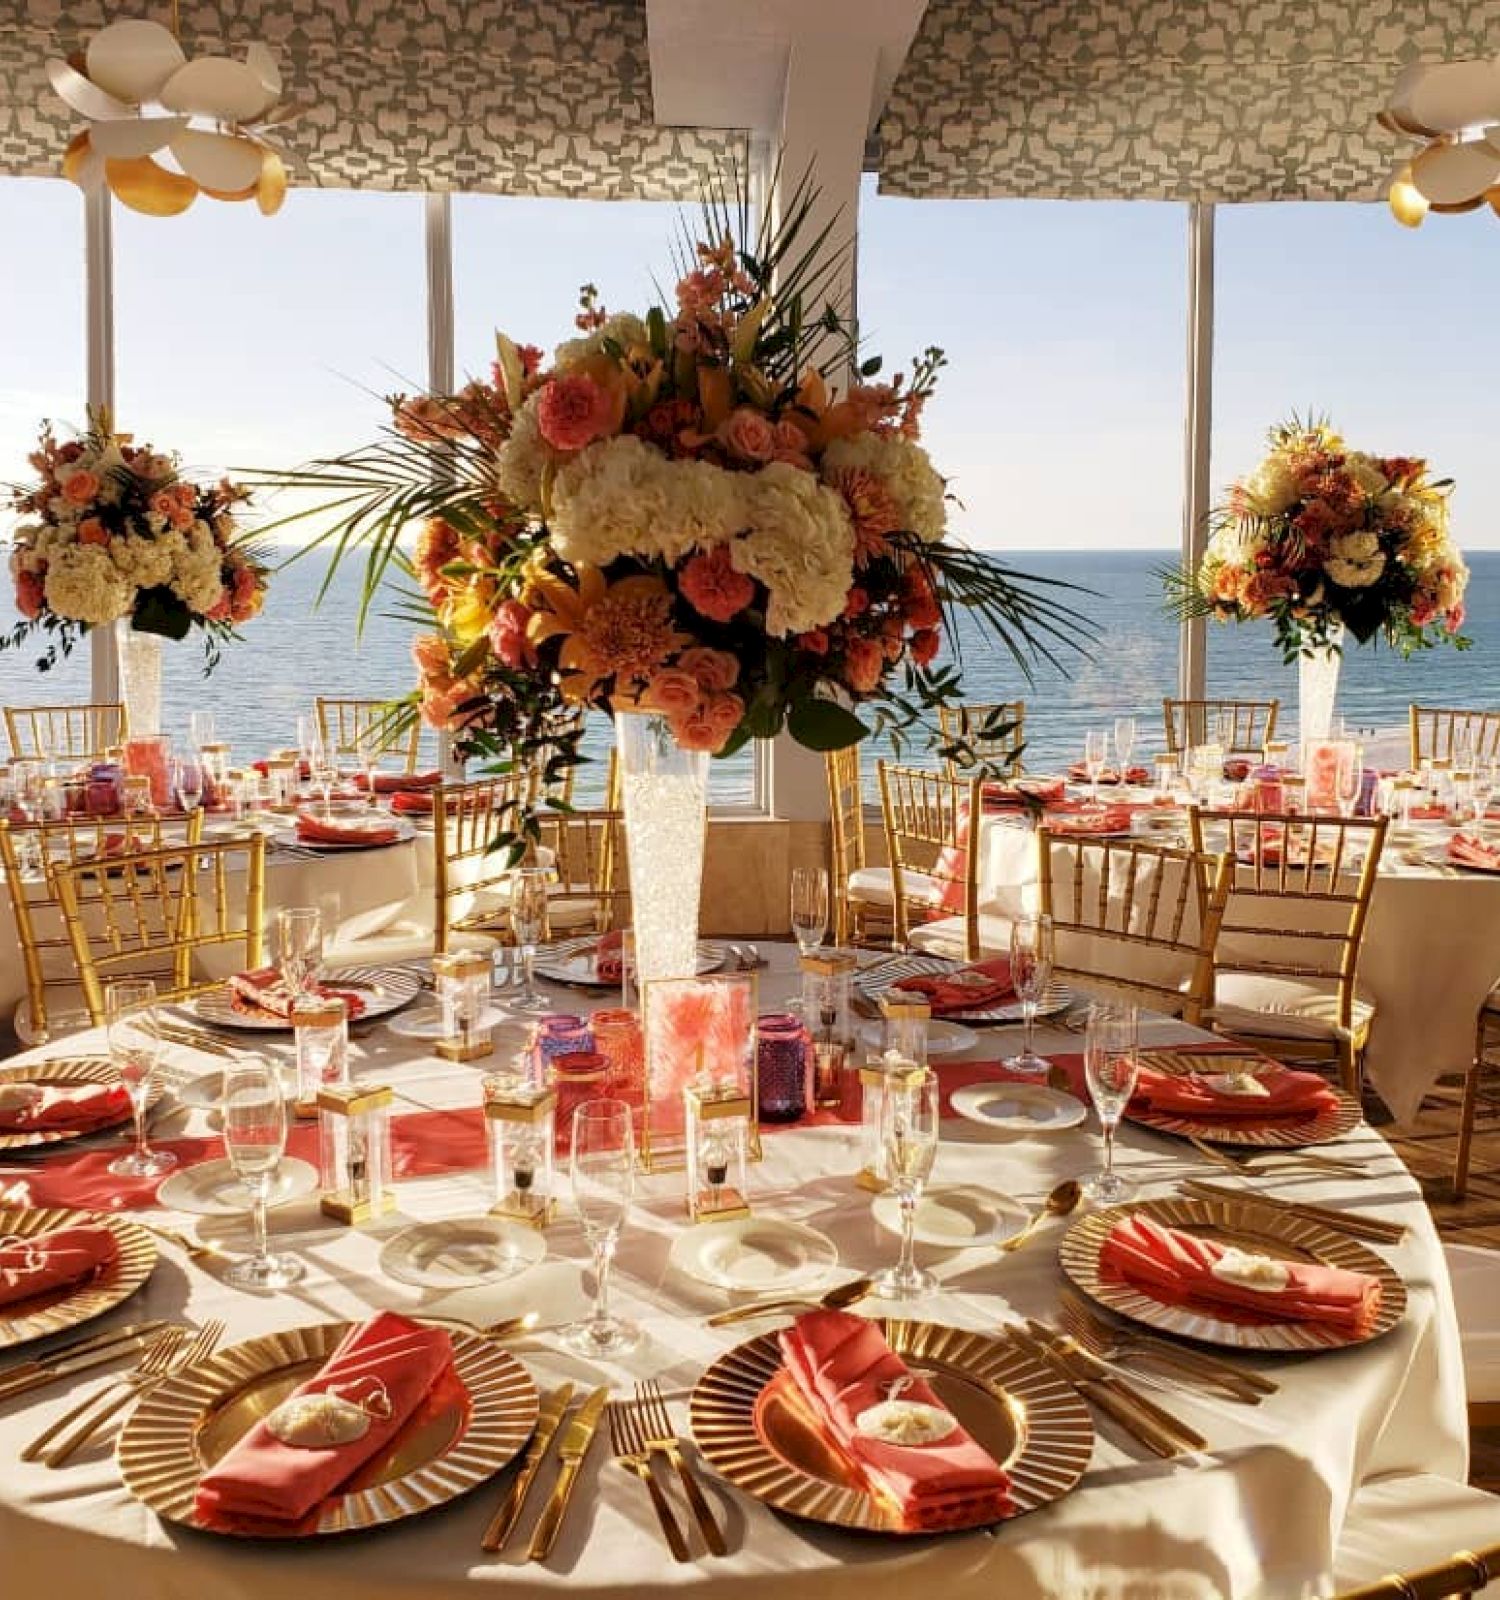 A beautifully decorated banquet hall features round tables with elegant floral centerpieces, gold chairs, and a stunning ocean view through large windows.